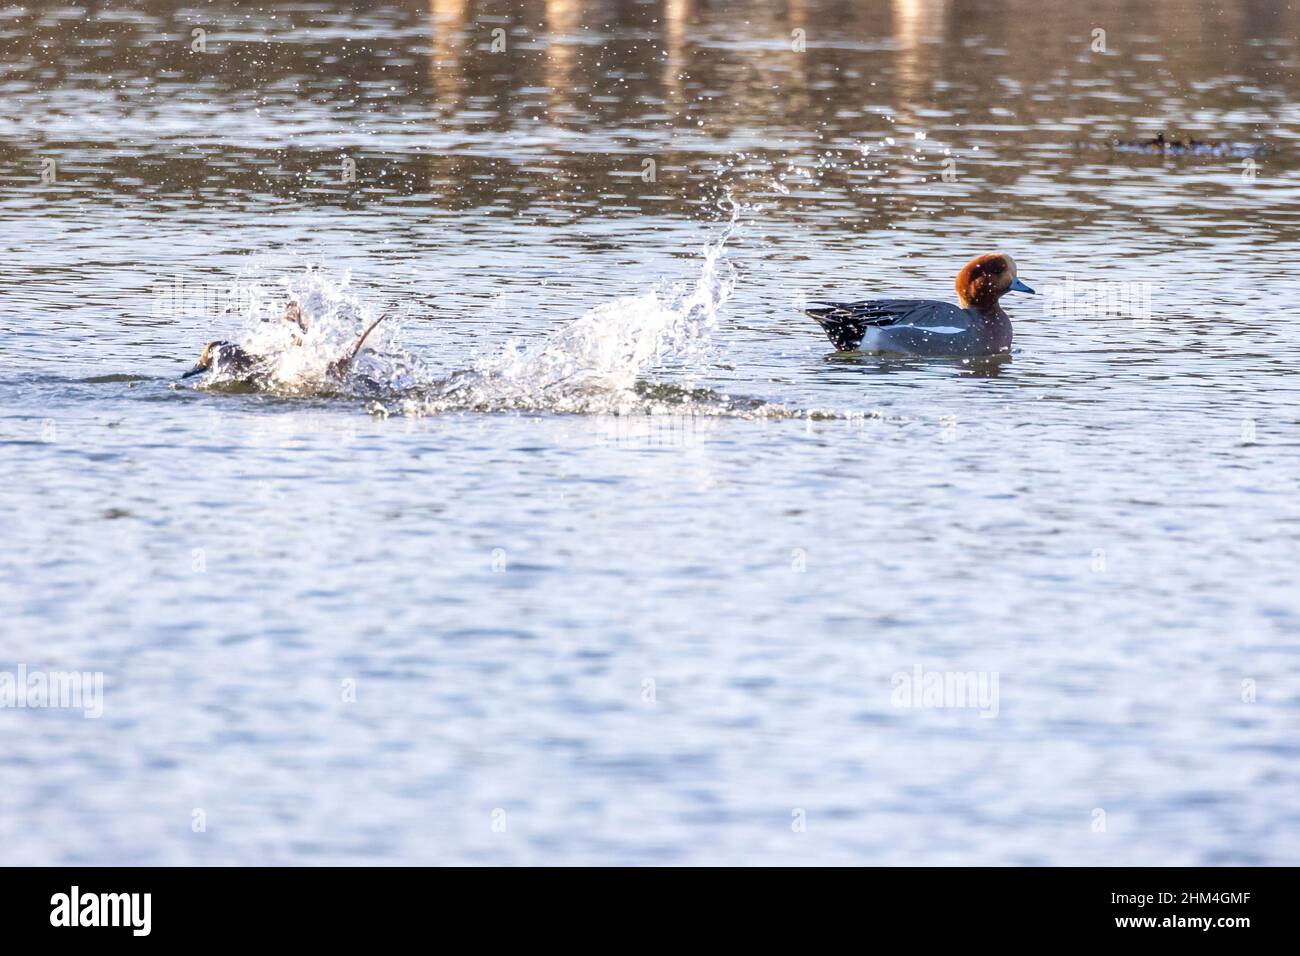 Duck tries to escape! While photographing a pair of Pochard Ducks, a large fish bites the rear of a smaller duck and drags it below the surface Stock Photo